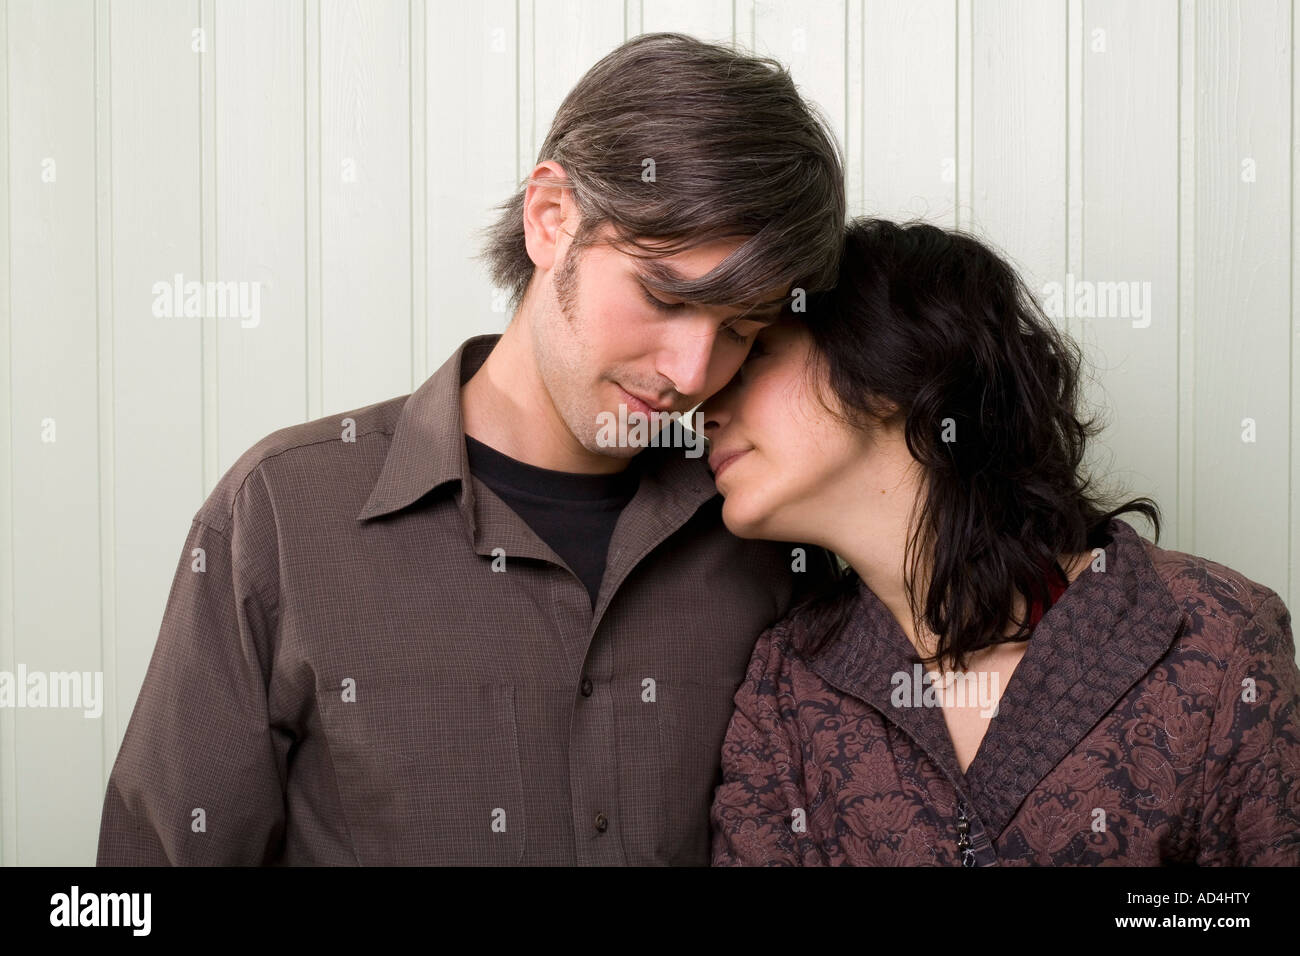 A young couple embracing Stock Photo